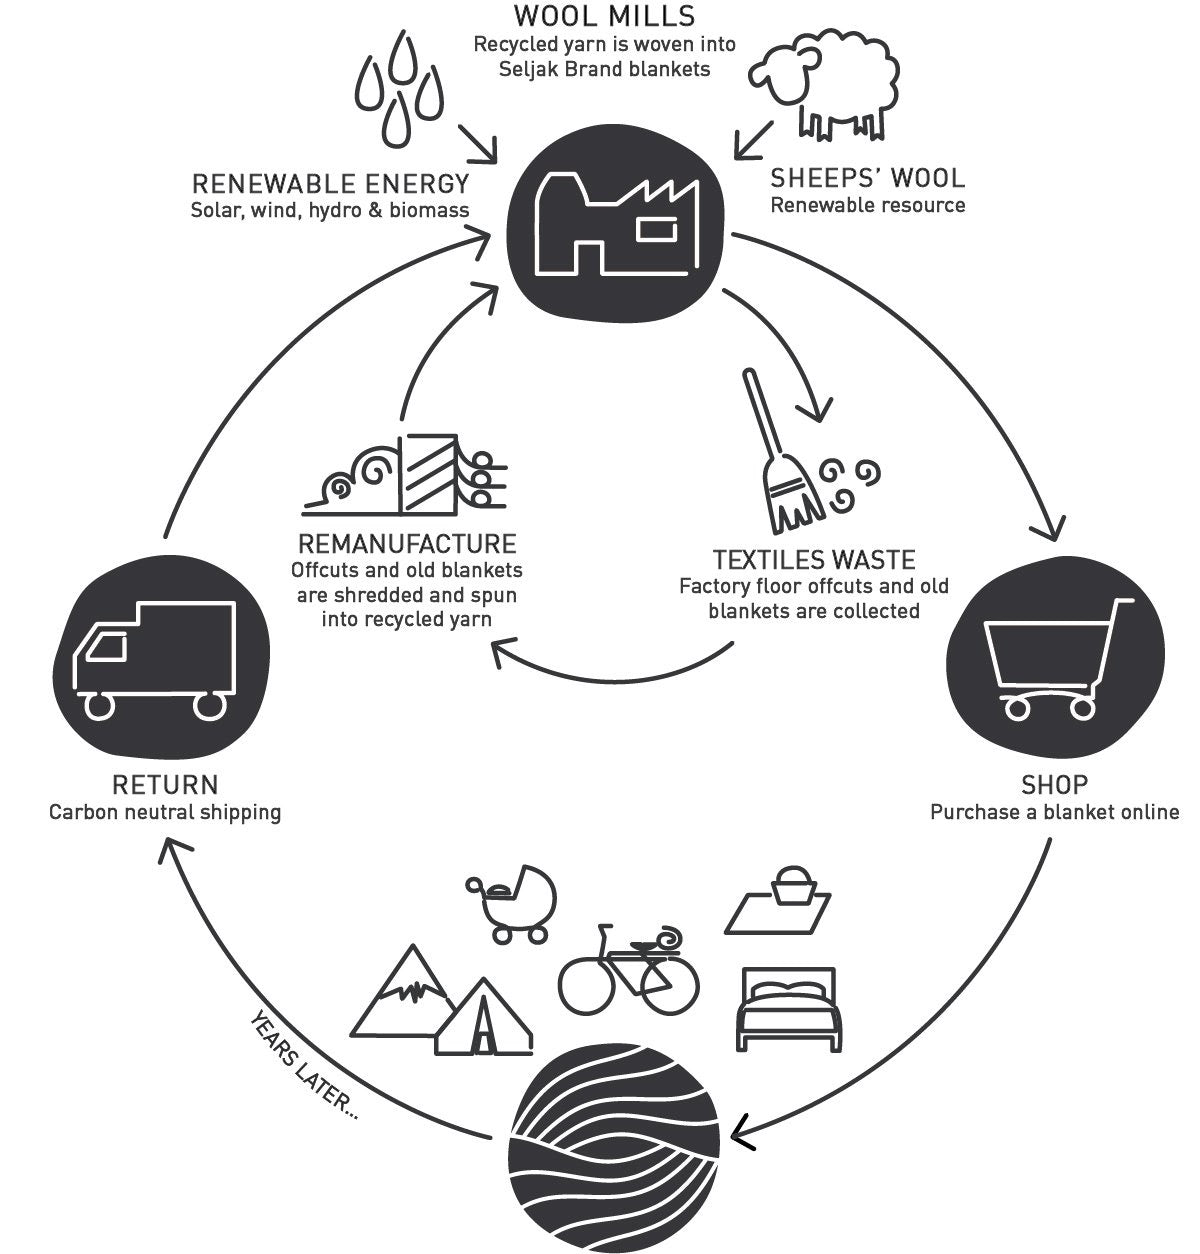 A diagram showing the life cycle of a Indigo Blanket – Fringe by Seljak Brand.